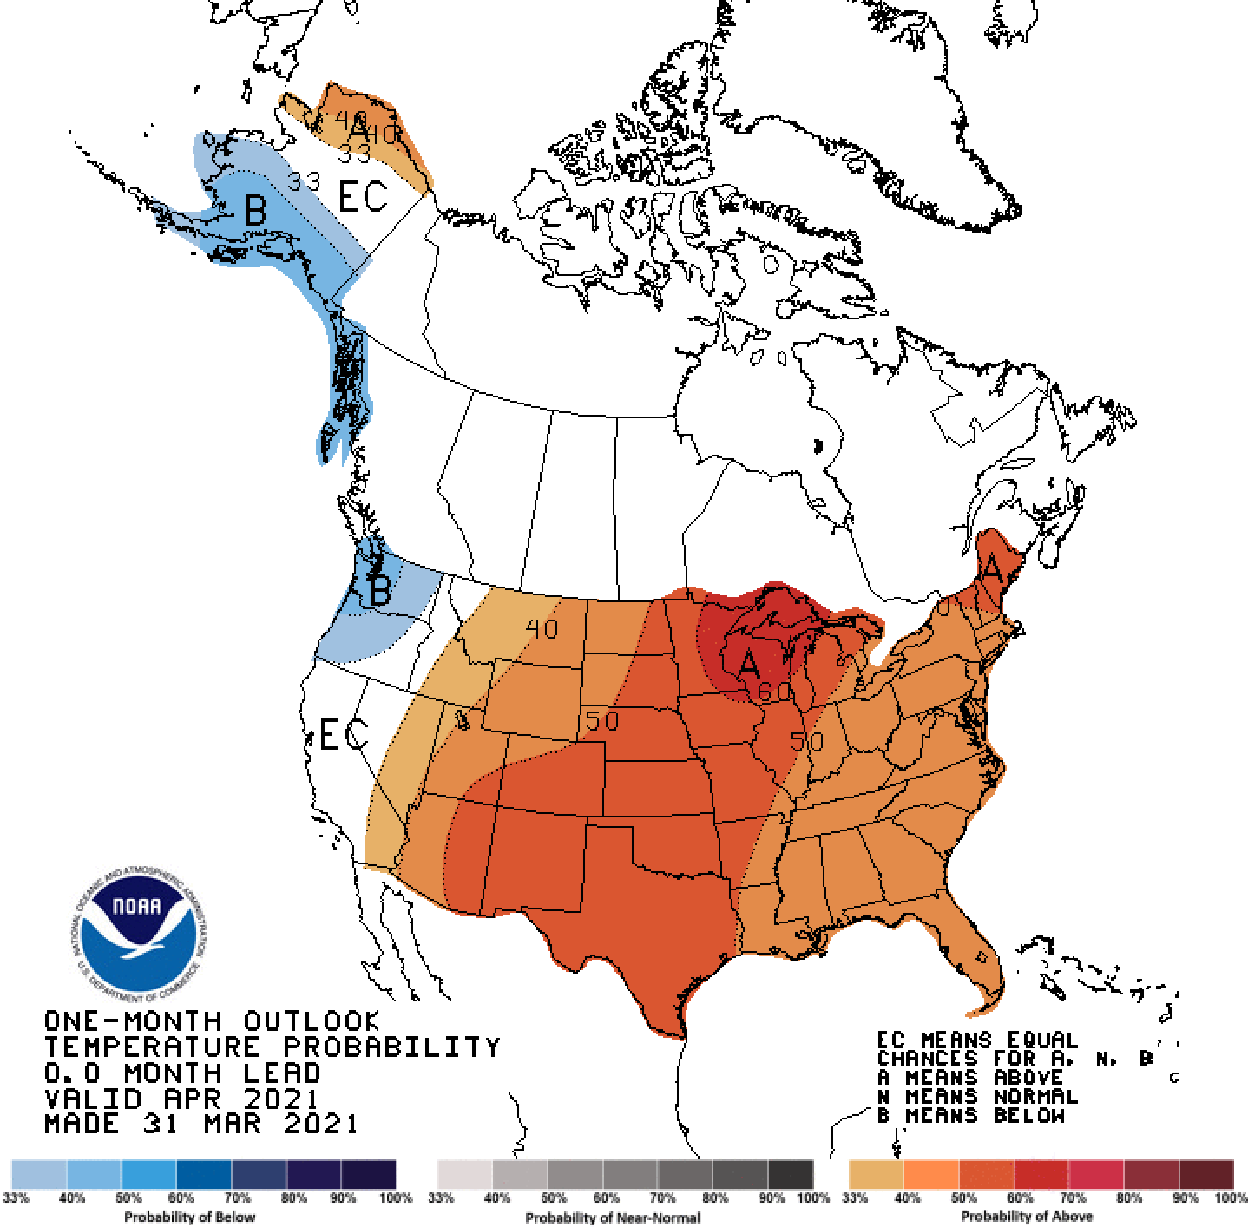 Color-coded map of the United States showing the one-month temperature outlook for April 2021.